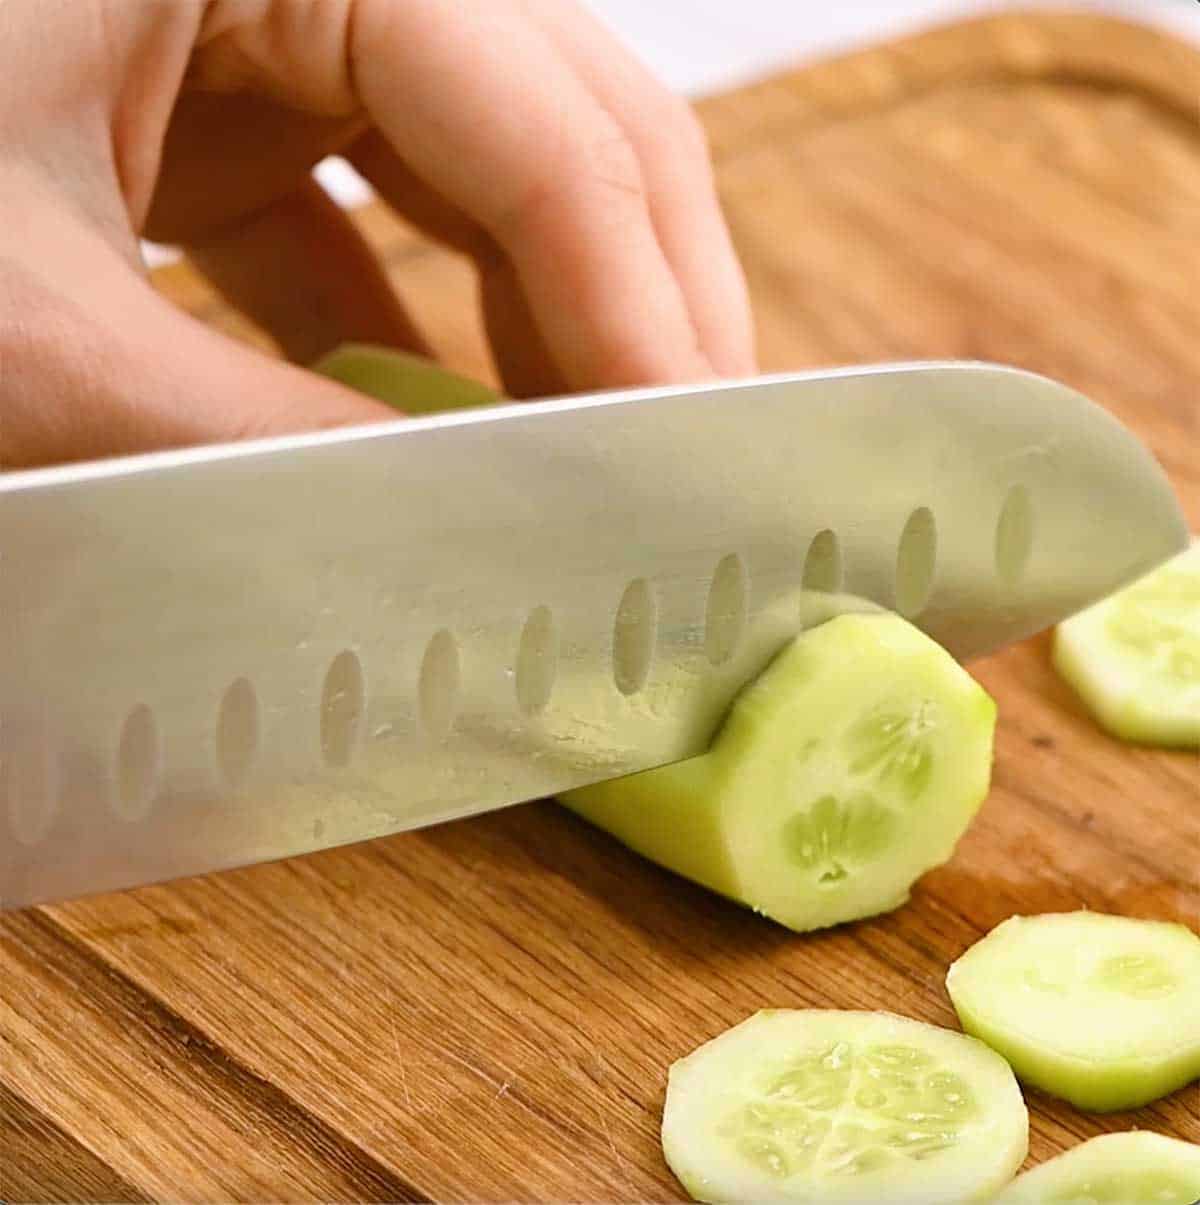 peeled cucumber being sliced with a large knife